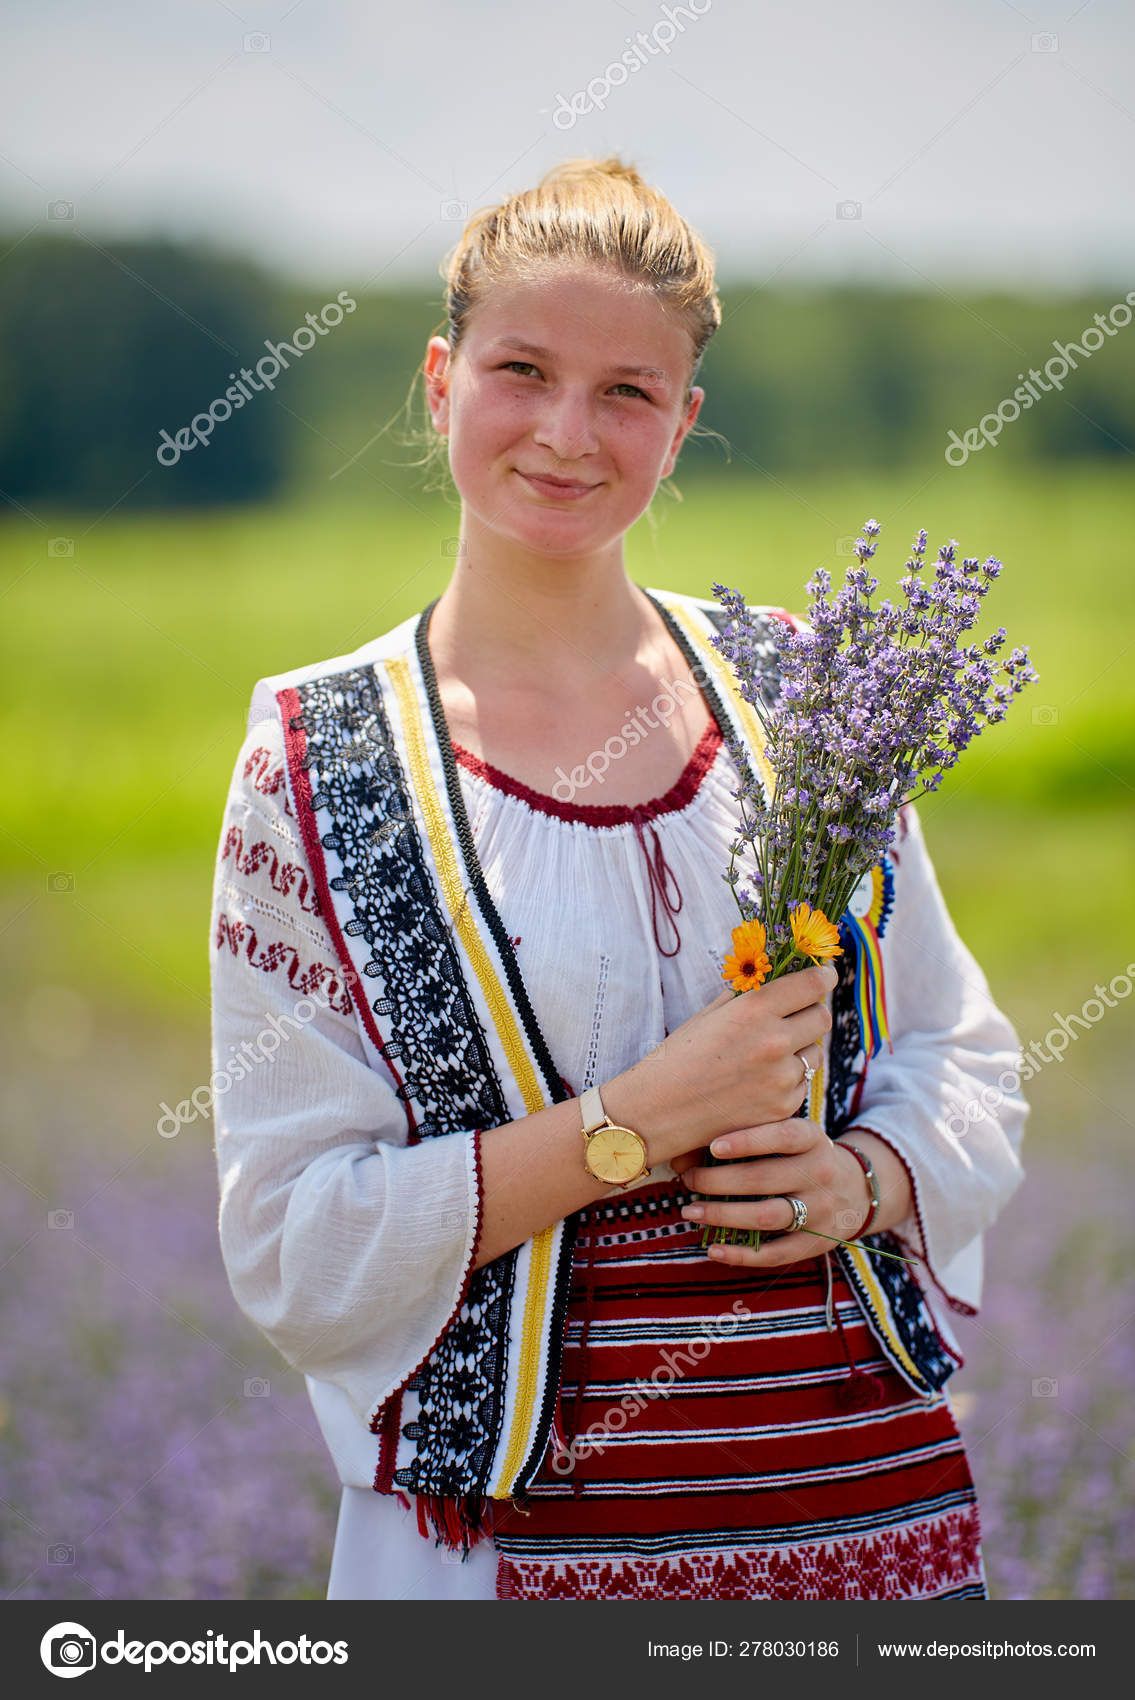 Romanian girls pictures